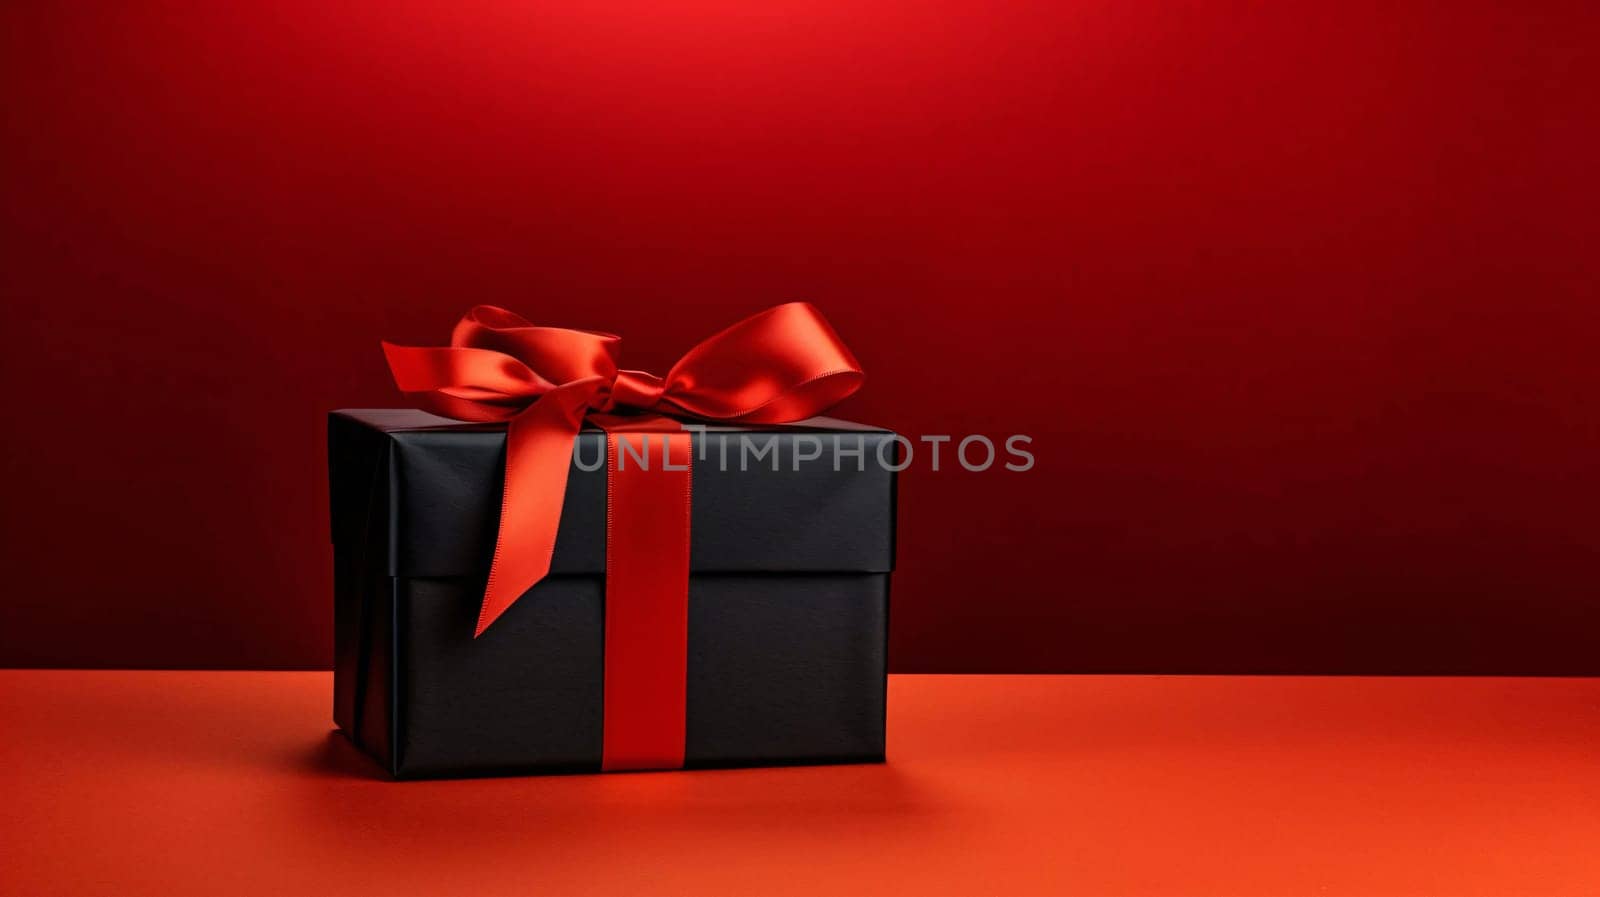 Black box, gift with red bow, red background.Valentine's Day banner with space for your own content. Heart as a symbol of affection and love.